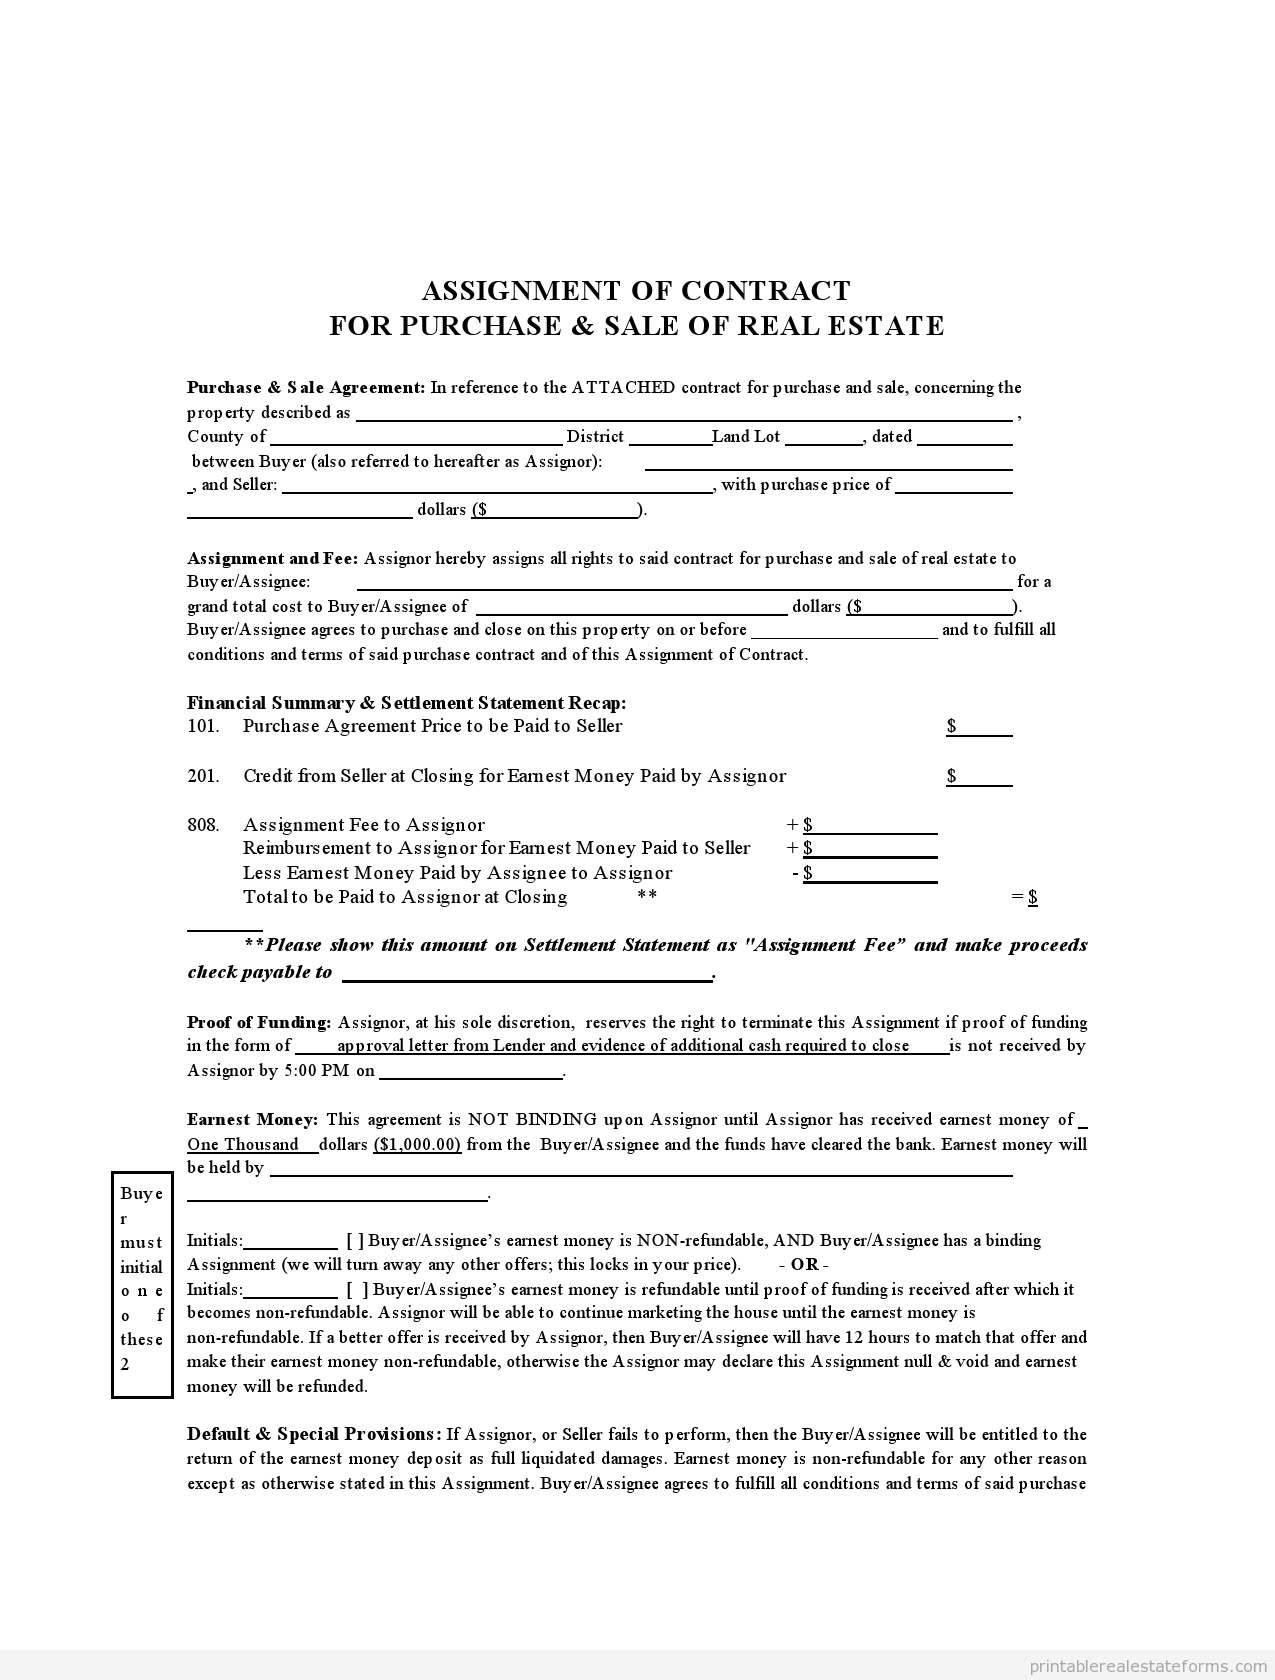 Sample Printable Assignment Of Contract Form  Sample Real Estate in Contract Assignment Agreement Template